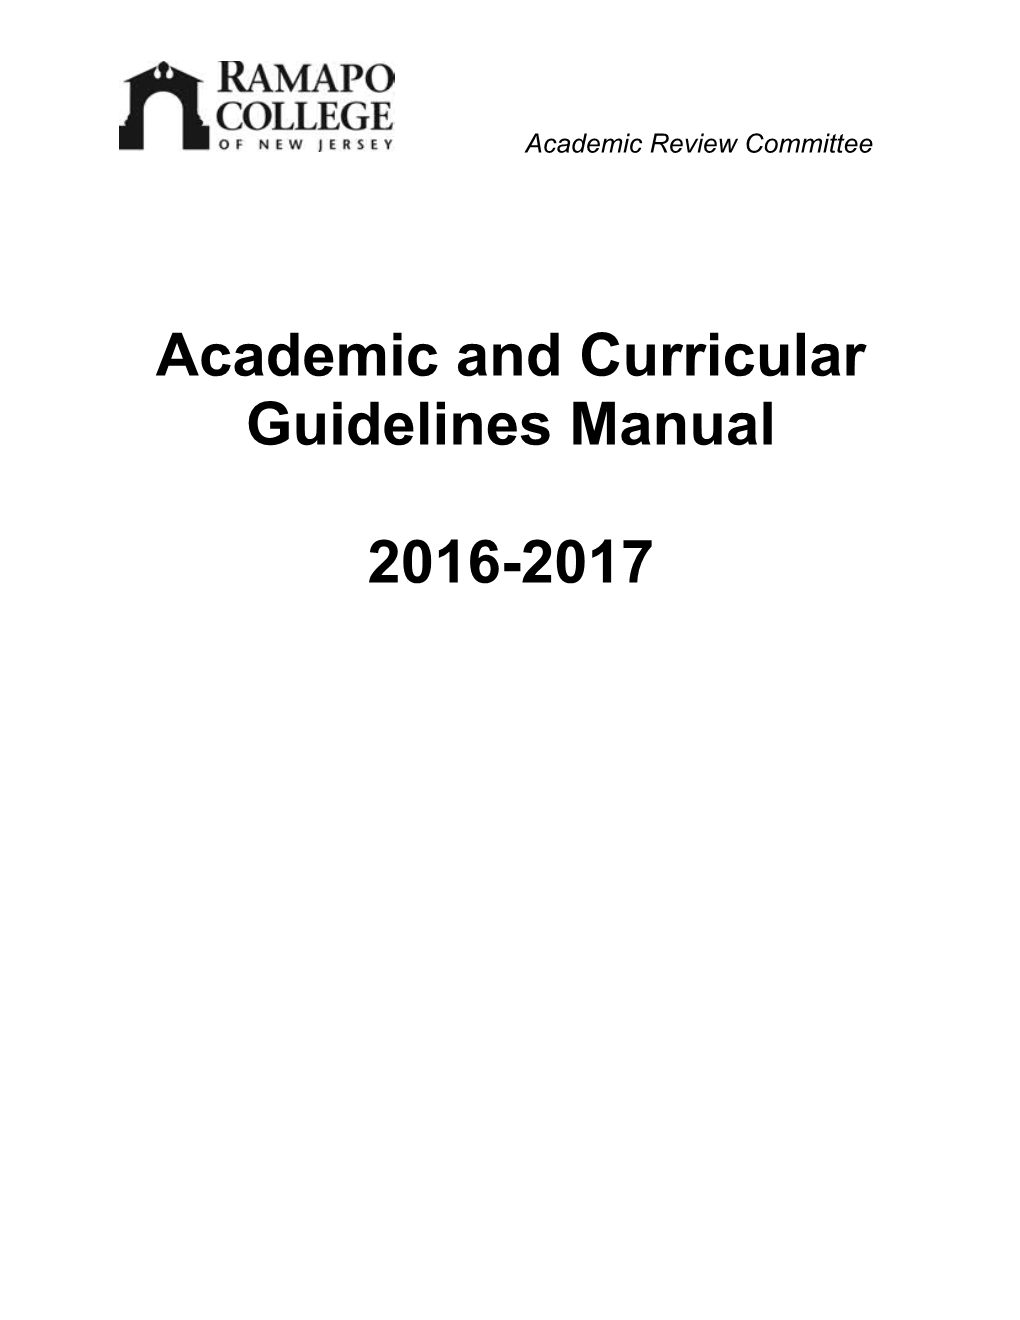 Ramapo College of New Jersey Academic and Curricular Guidelines Manual 2016-2017